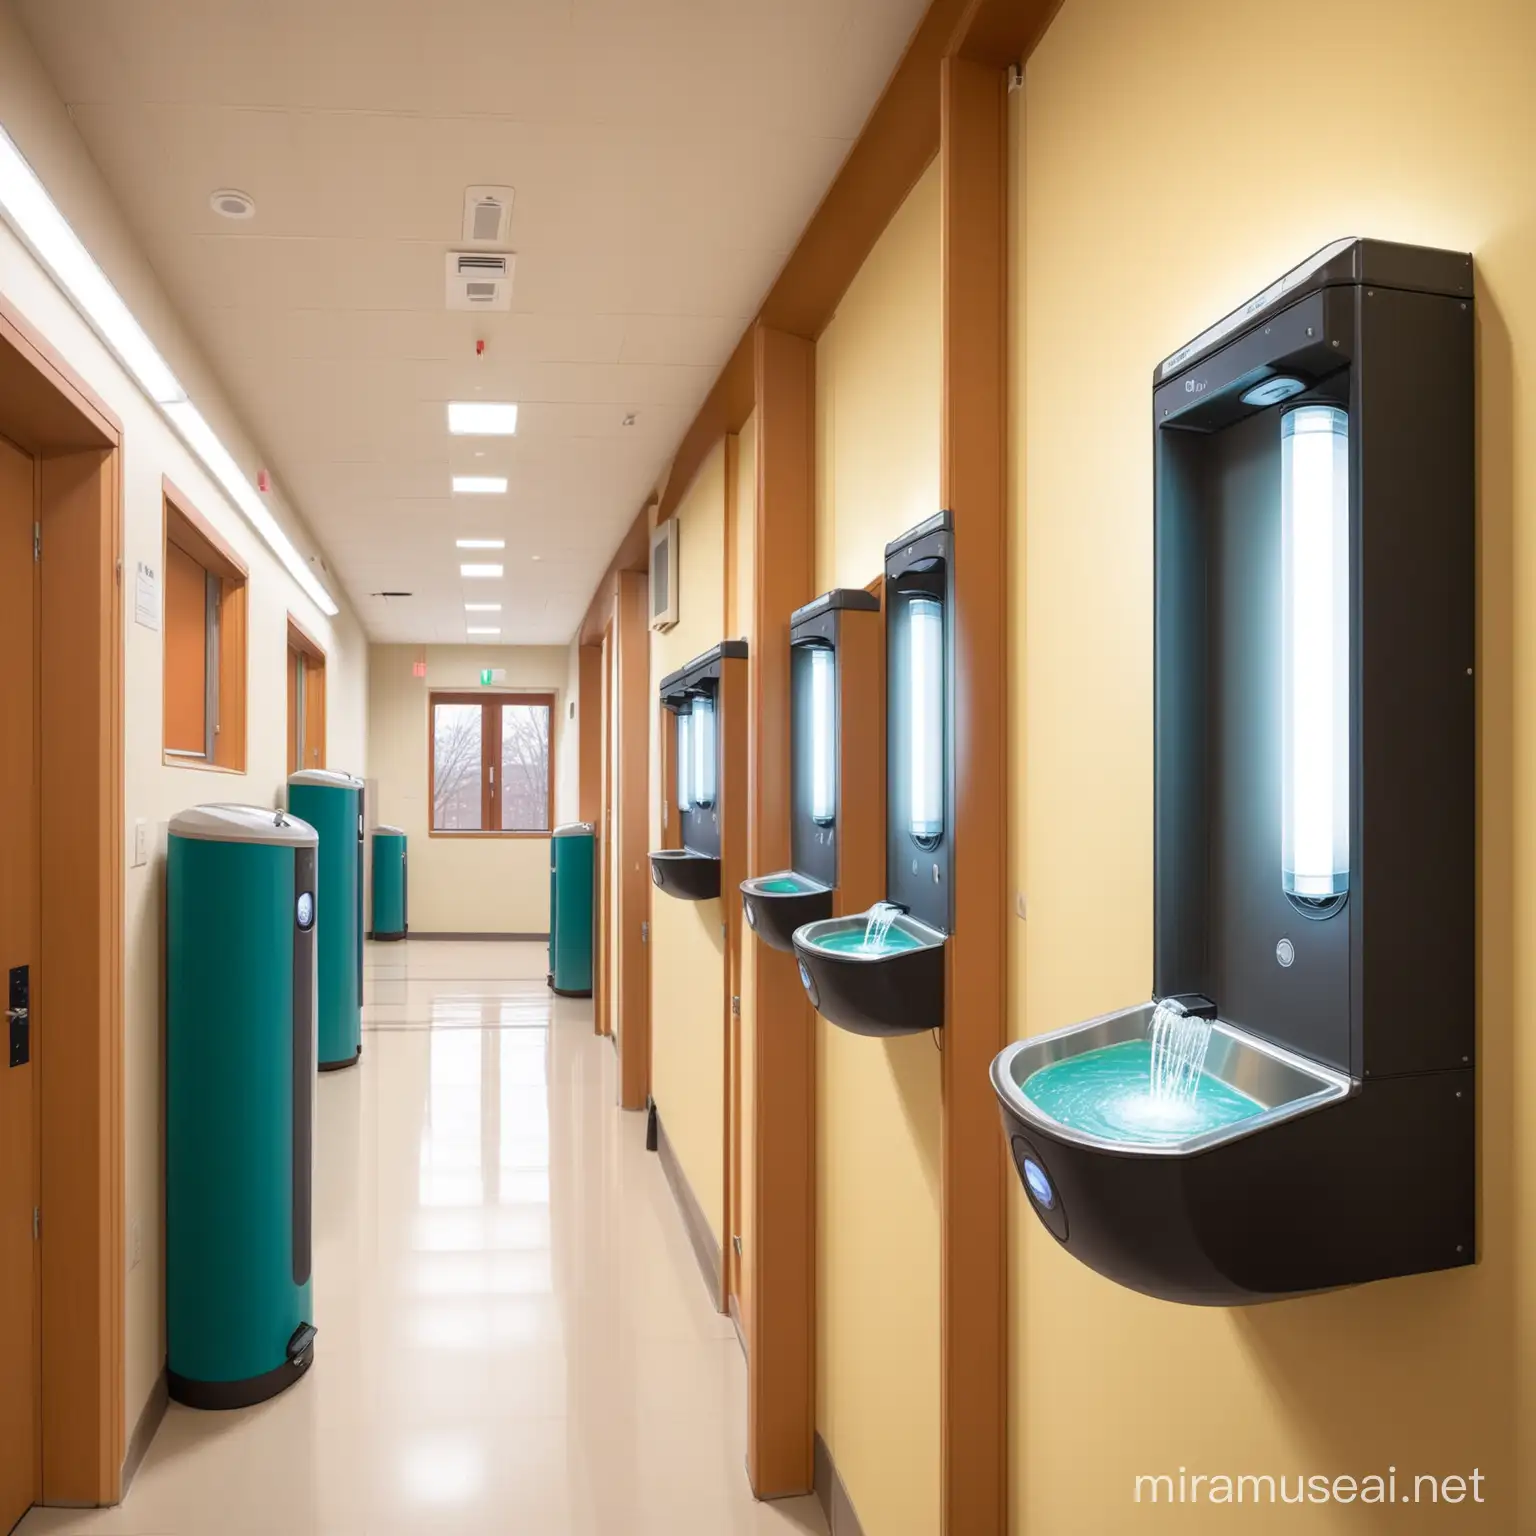 Sustainable College Campus with Dorm Hall Light Sensors and Water Fountains